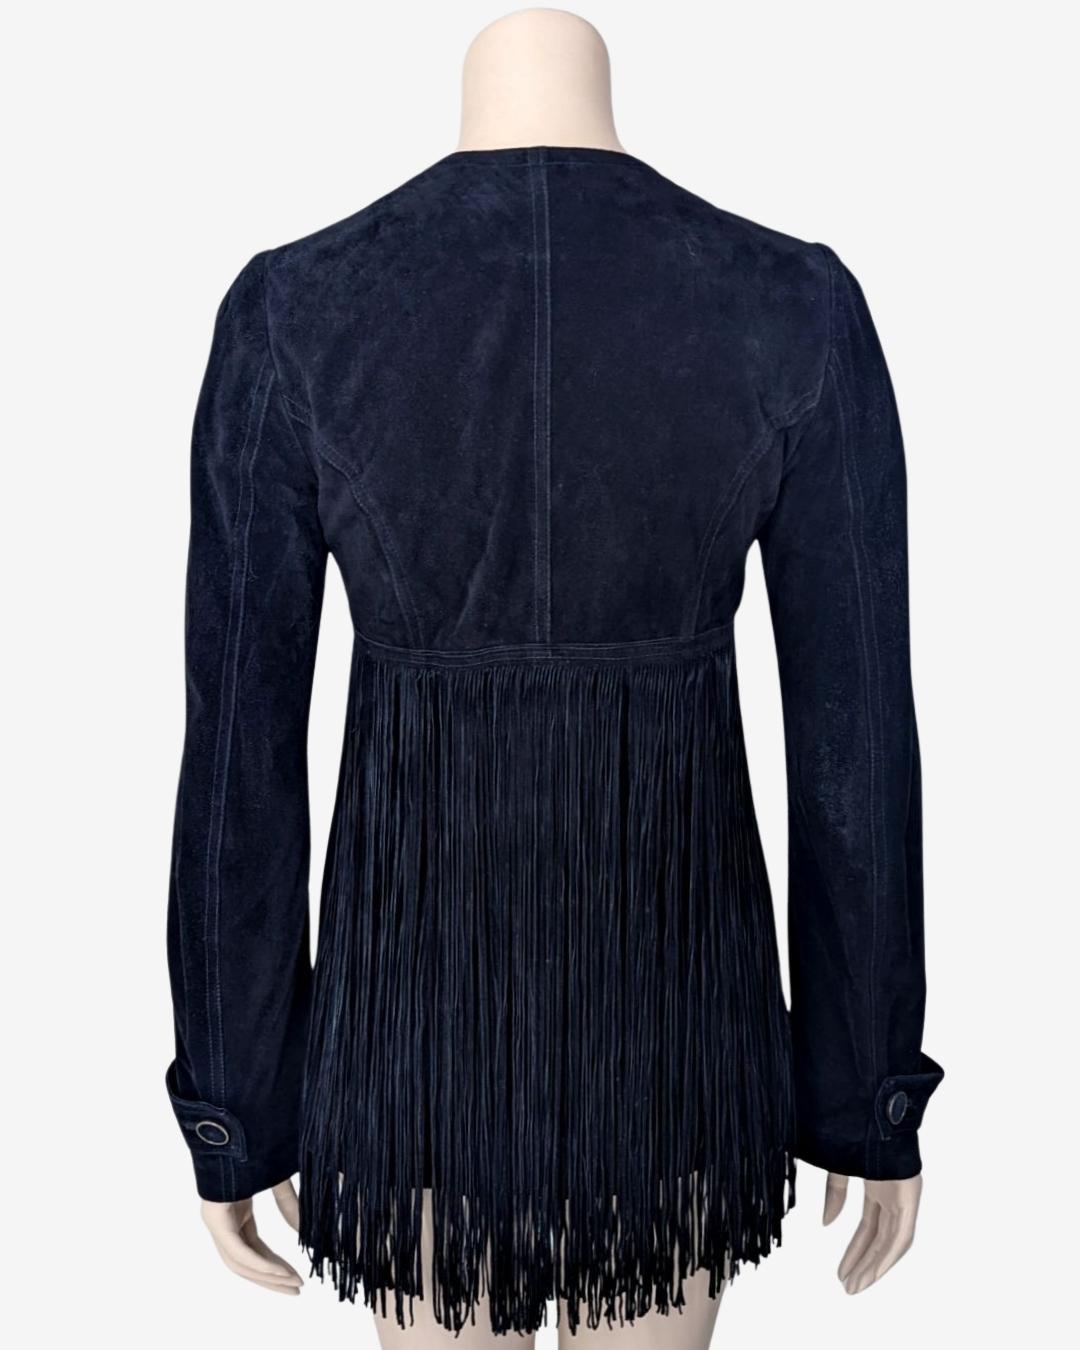 Plein Sud by Faycal Amor western jacket with fringes all-over  For Sale 1